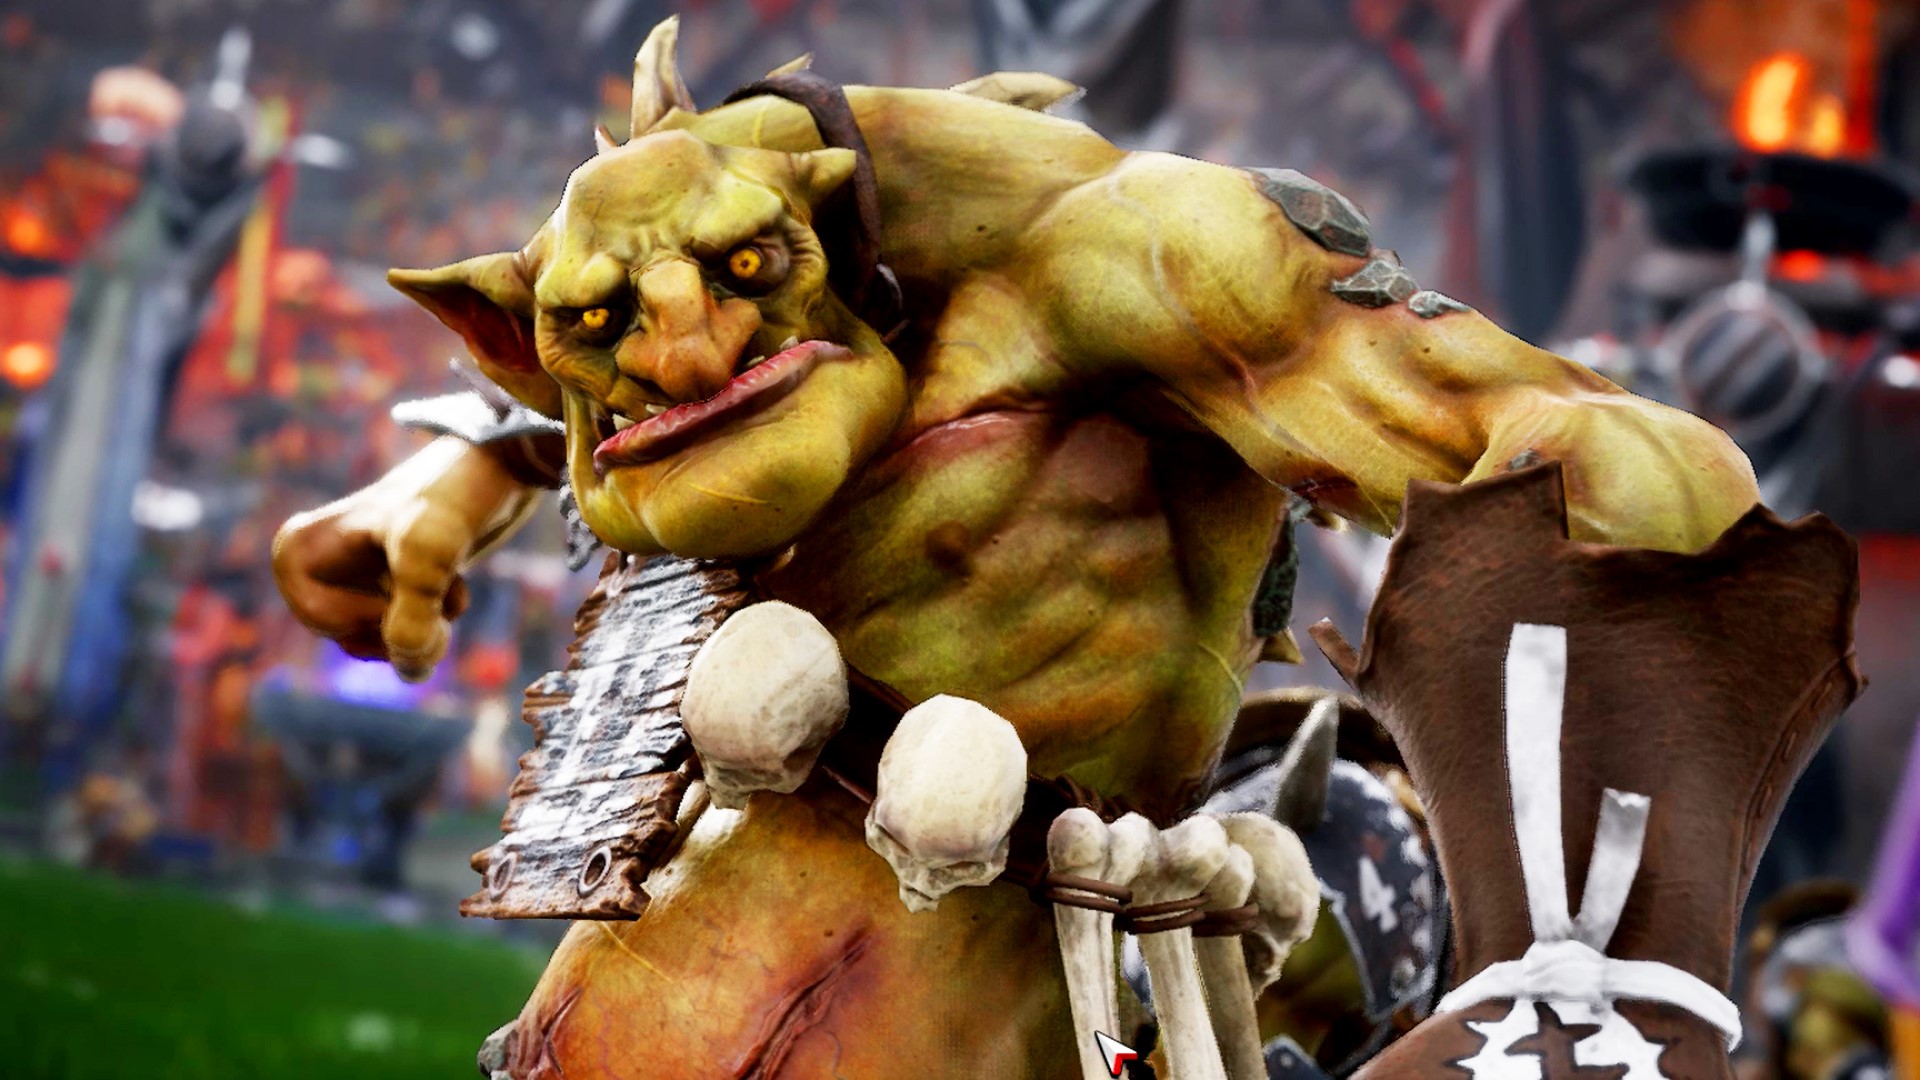 New Warhammer football game Blood Bowl 3 release date set for February